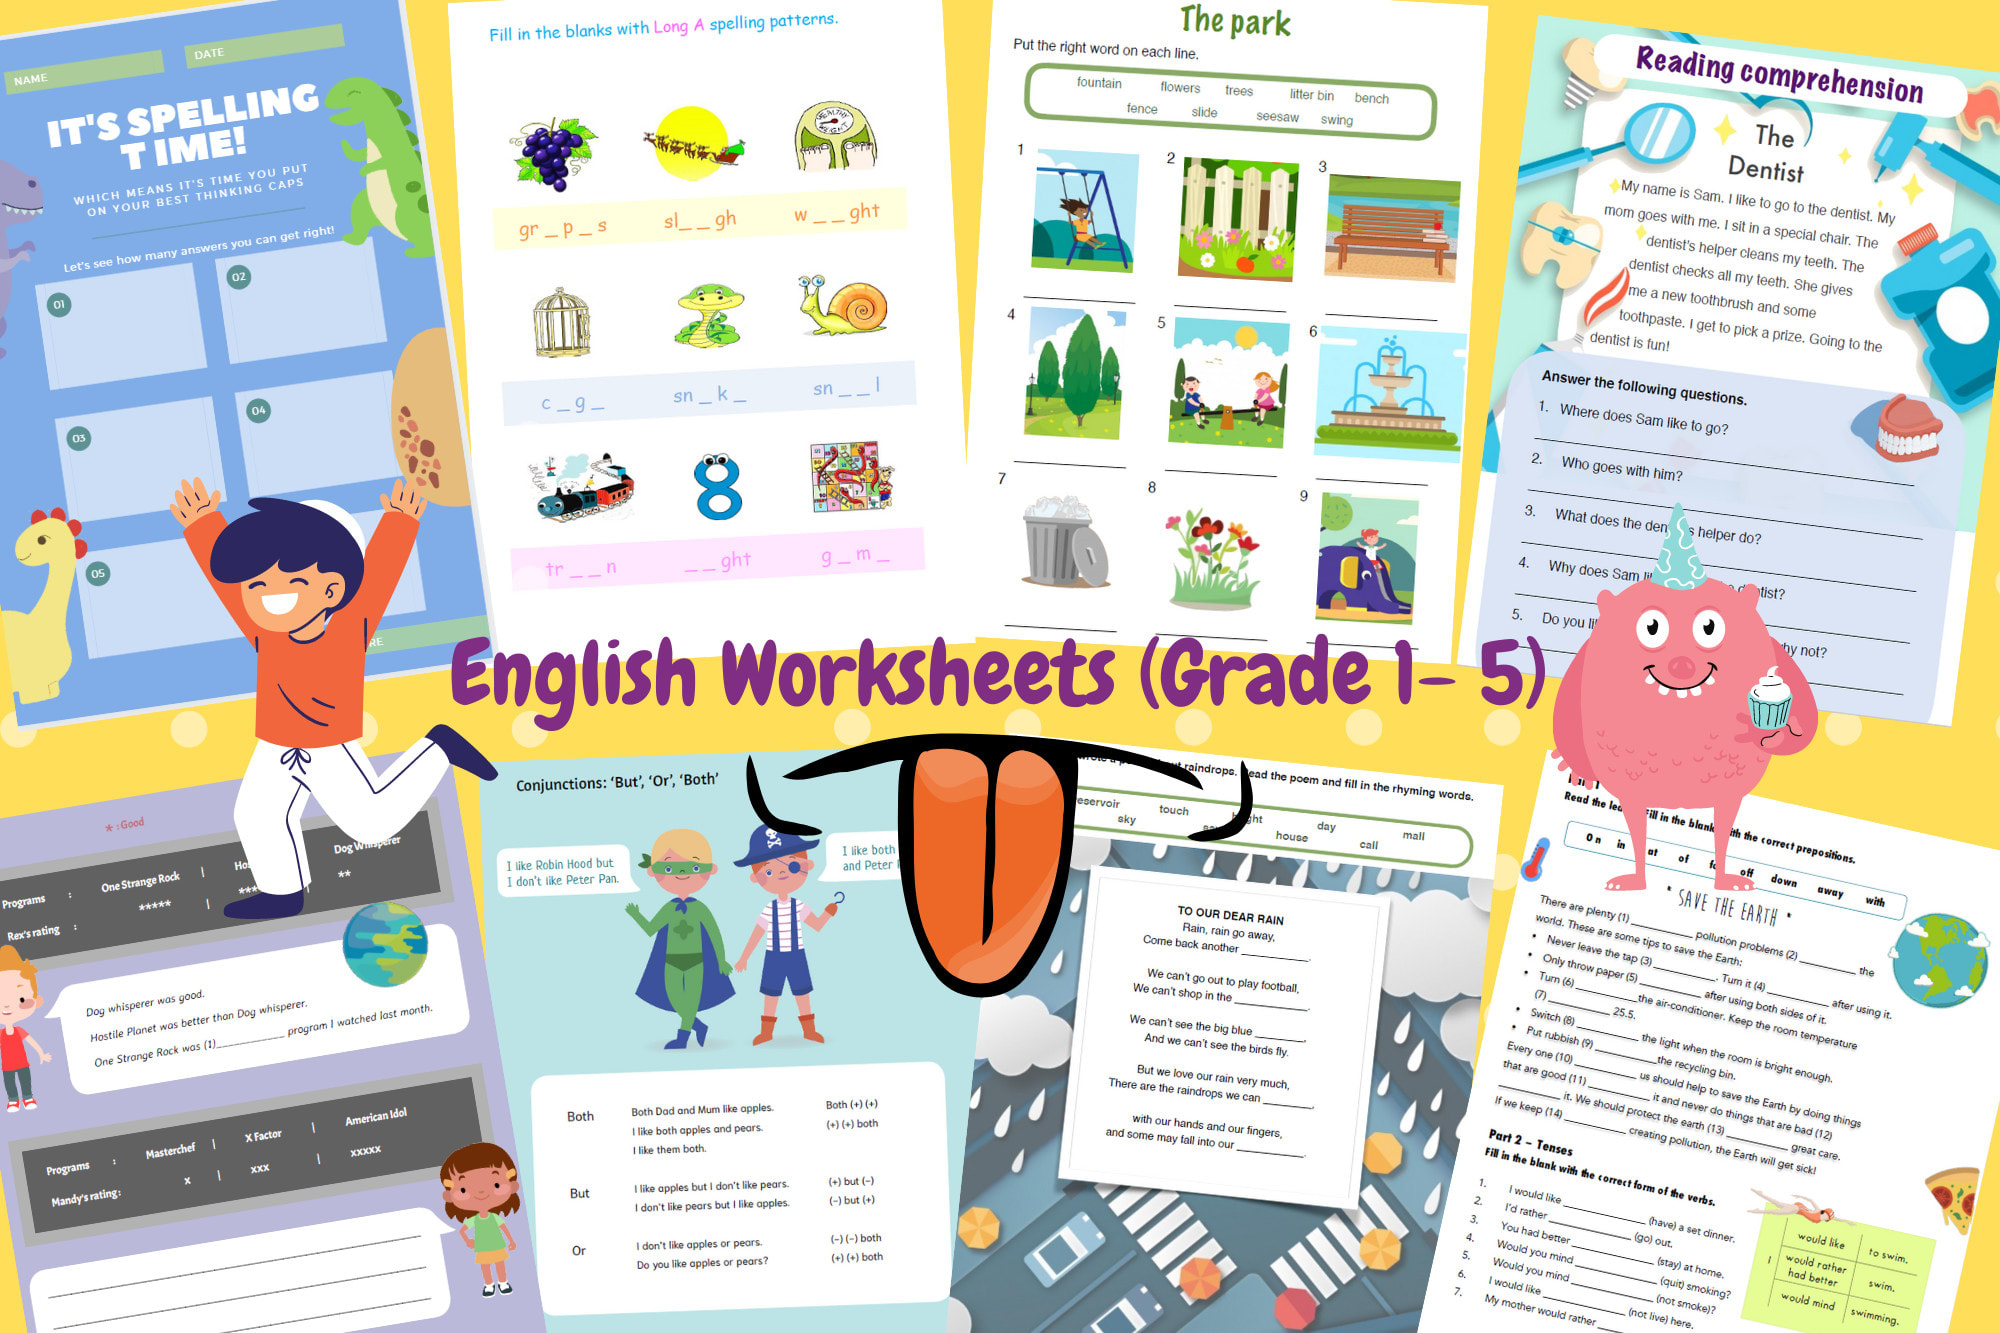 create english worksheets for students grade 1 through 5 by tarimisu fiverr